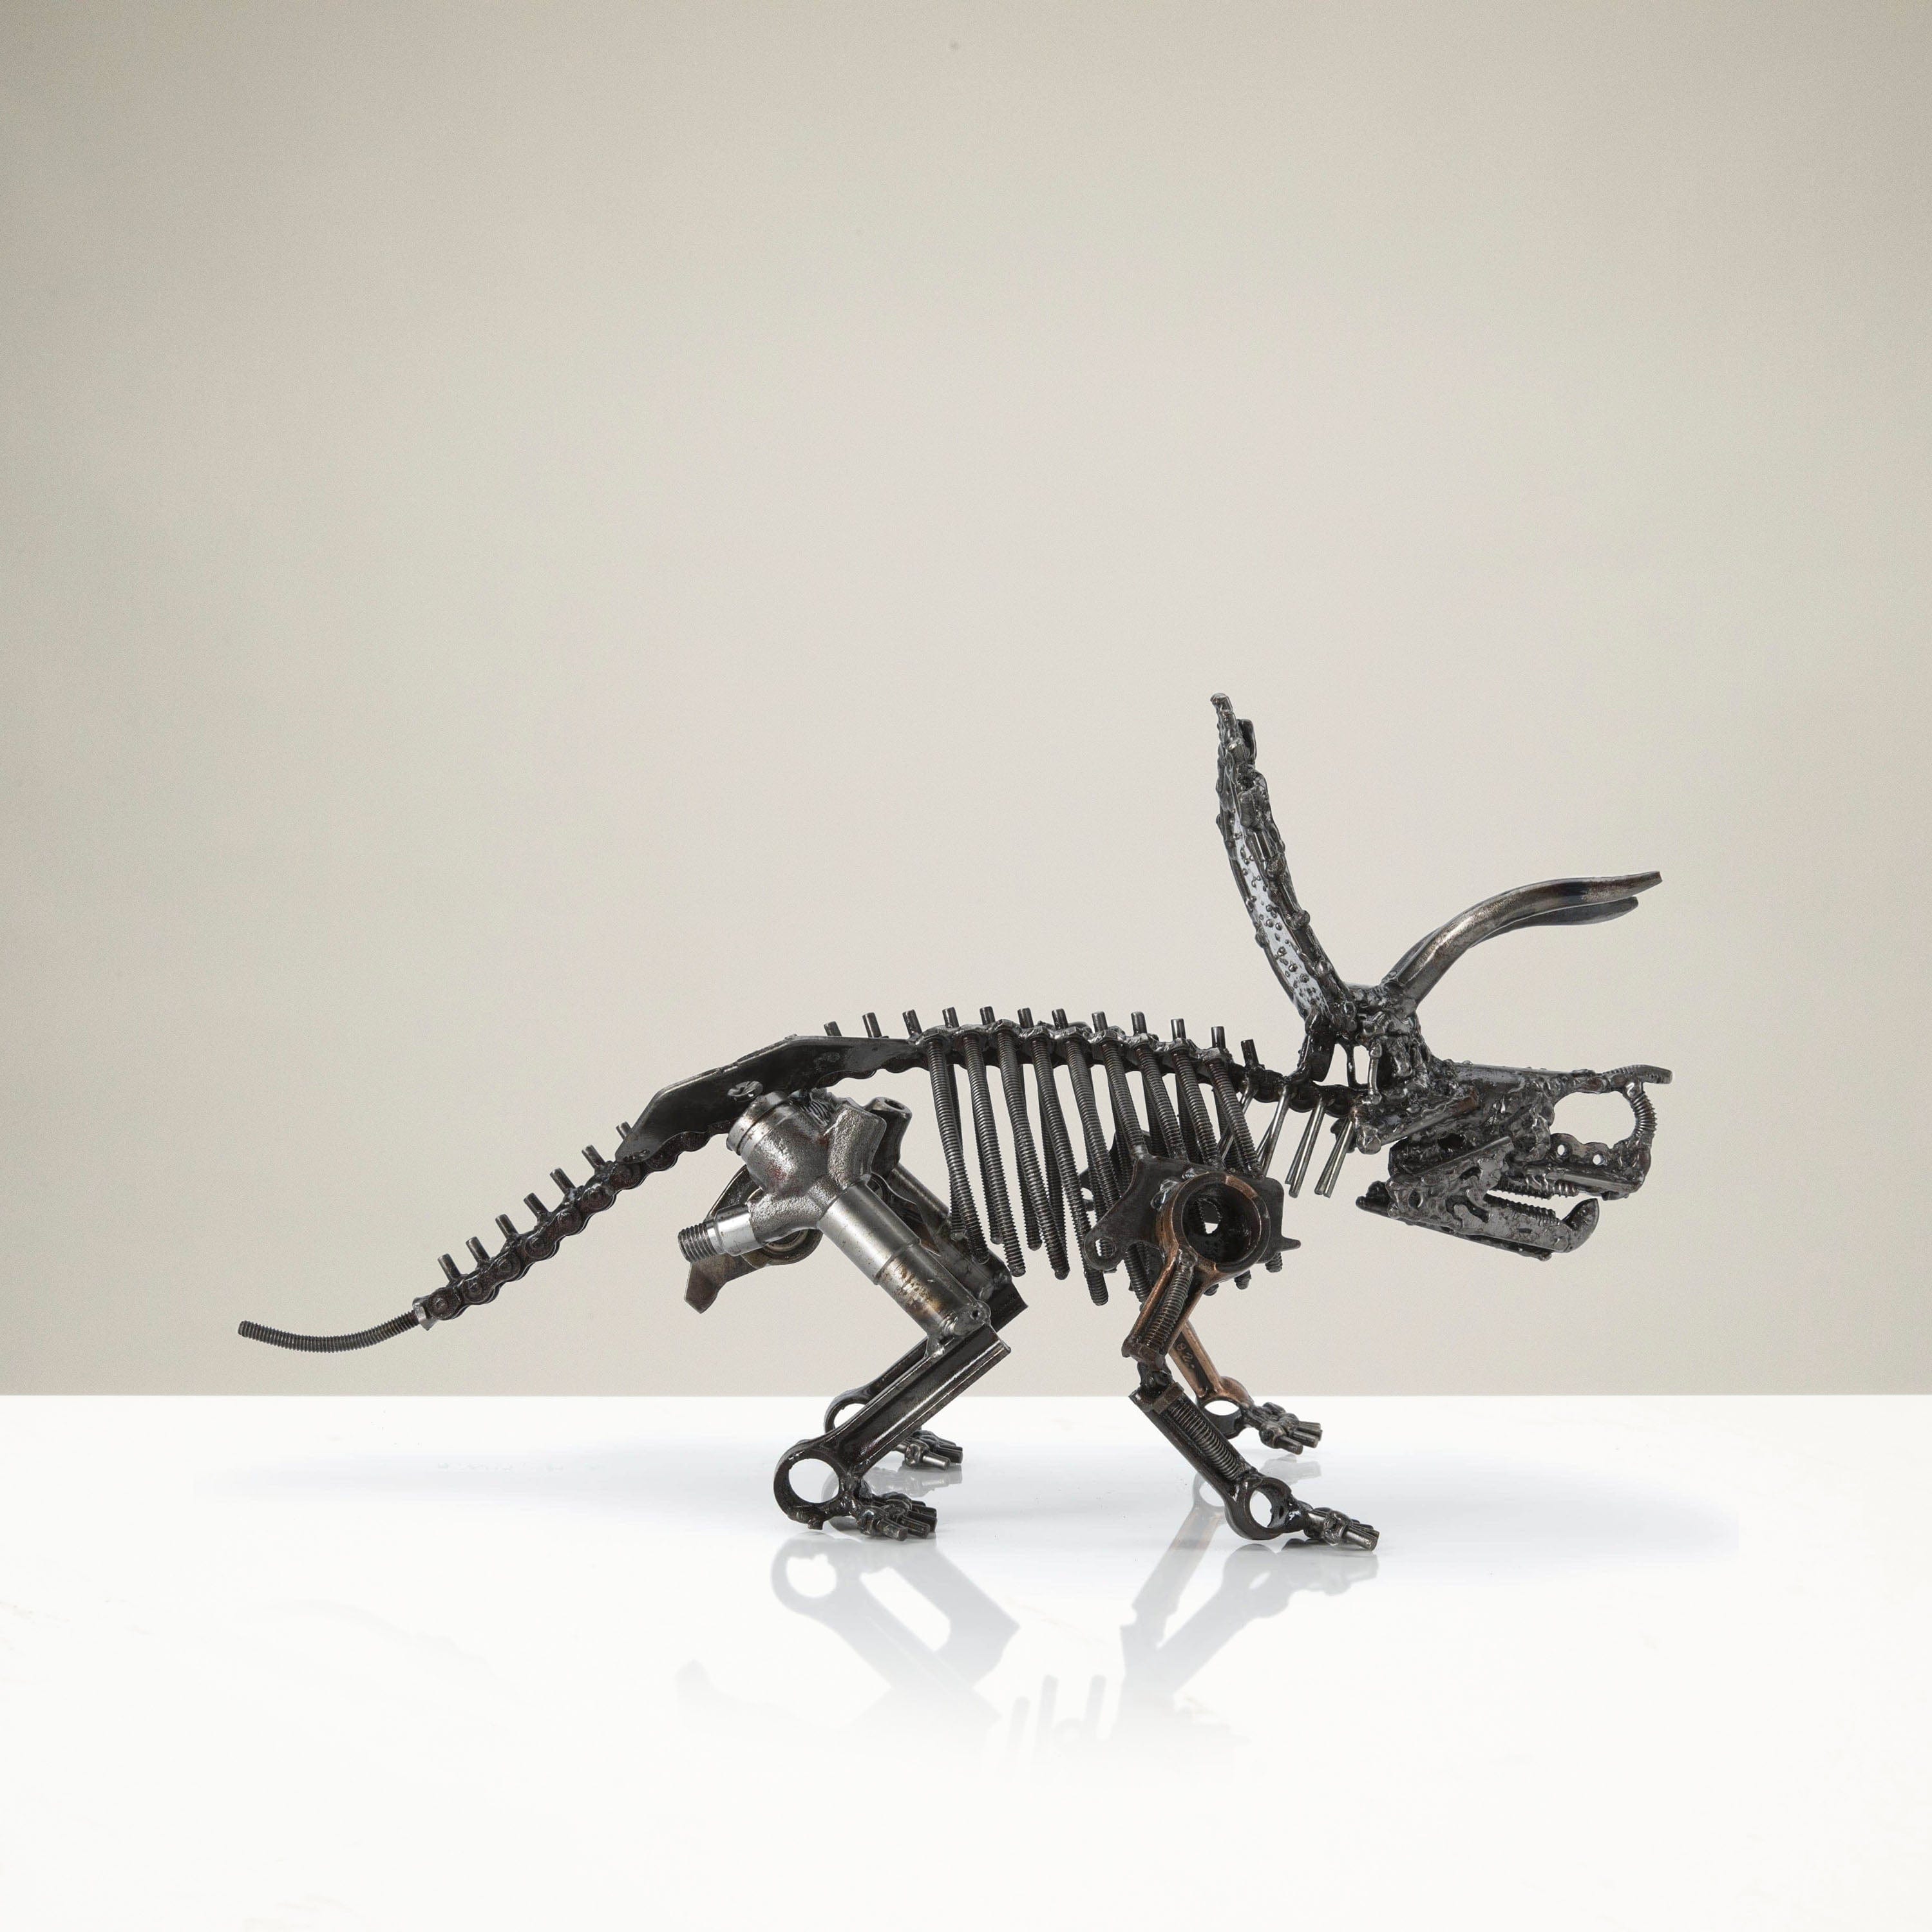 Kalifano Recycled Metal Art Triceratops Skeleton Inspired Recycled Metal Sculpture RMS-1500TS-N